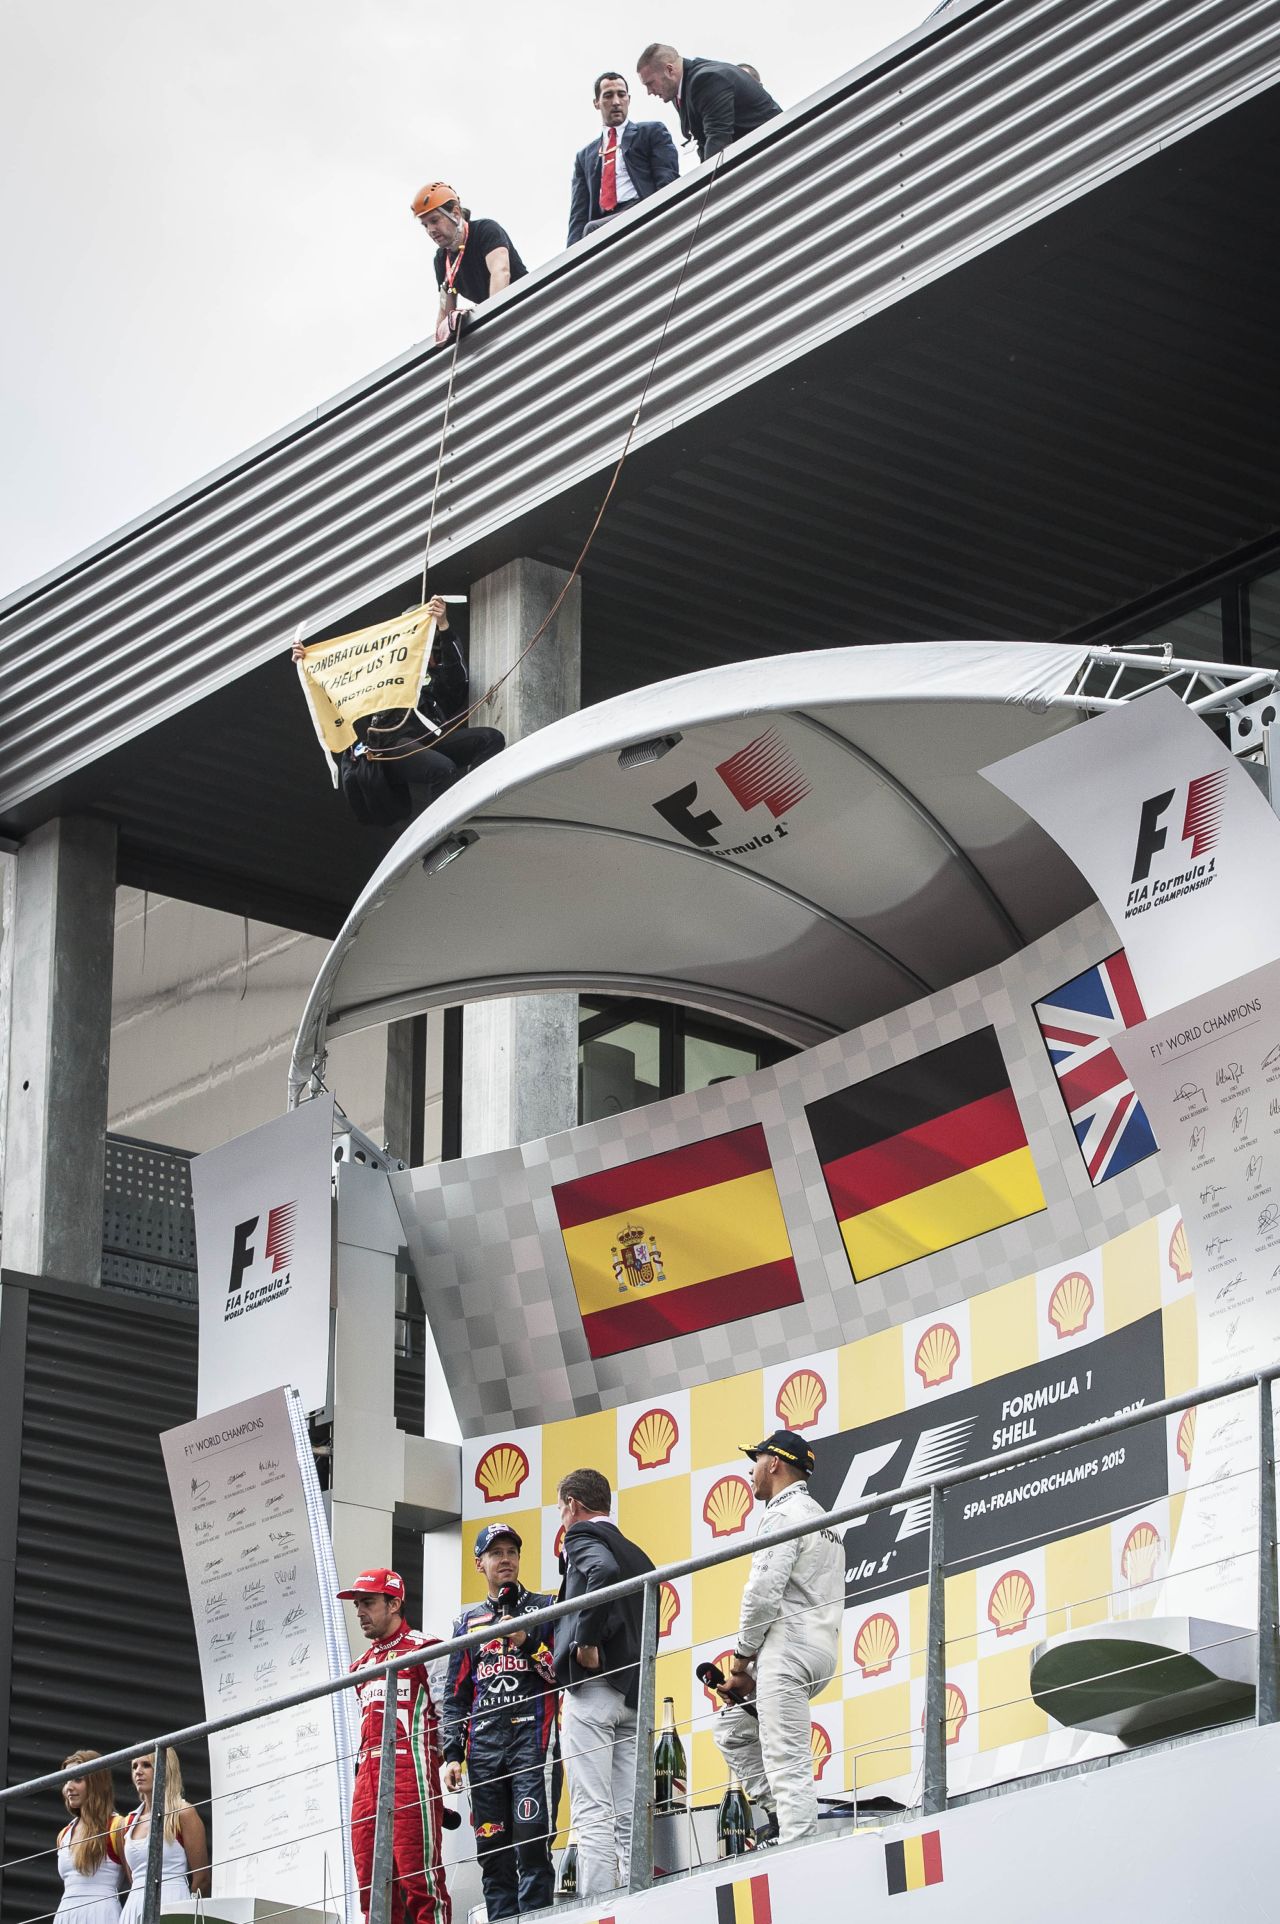 A member of Greenpeace also managed to unfurl a banner above the winner's podium at the end of the race, where  drivers Sebastian Vettel, Fernando Alonso and Lewis Hamilton addressed the crowd.